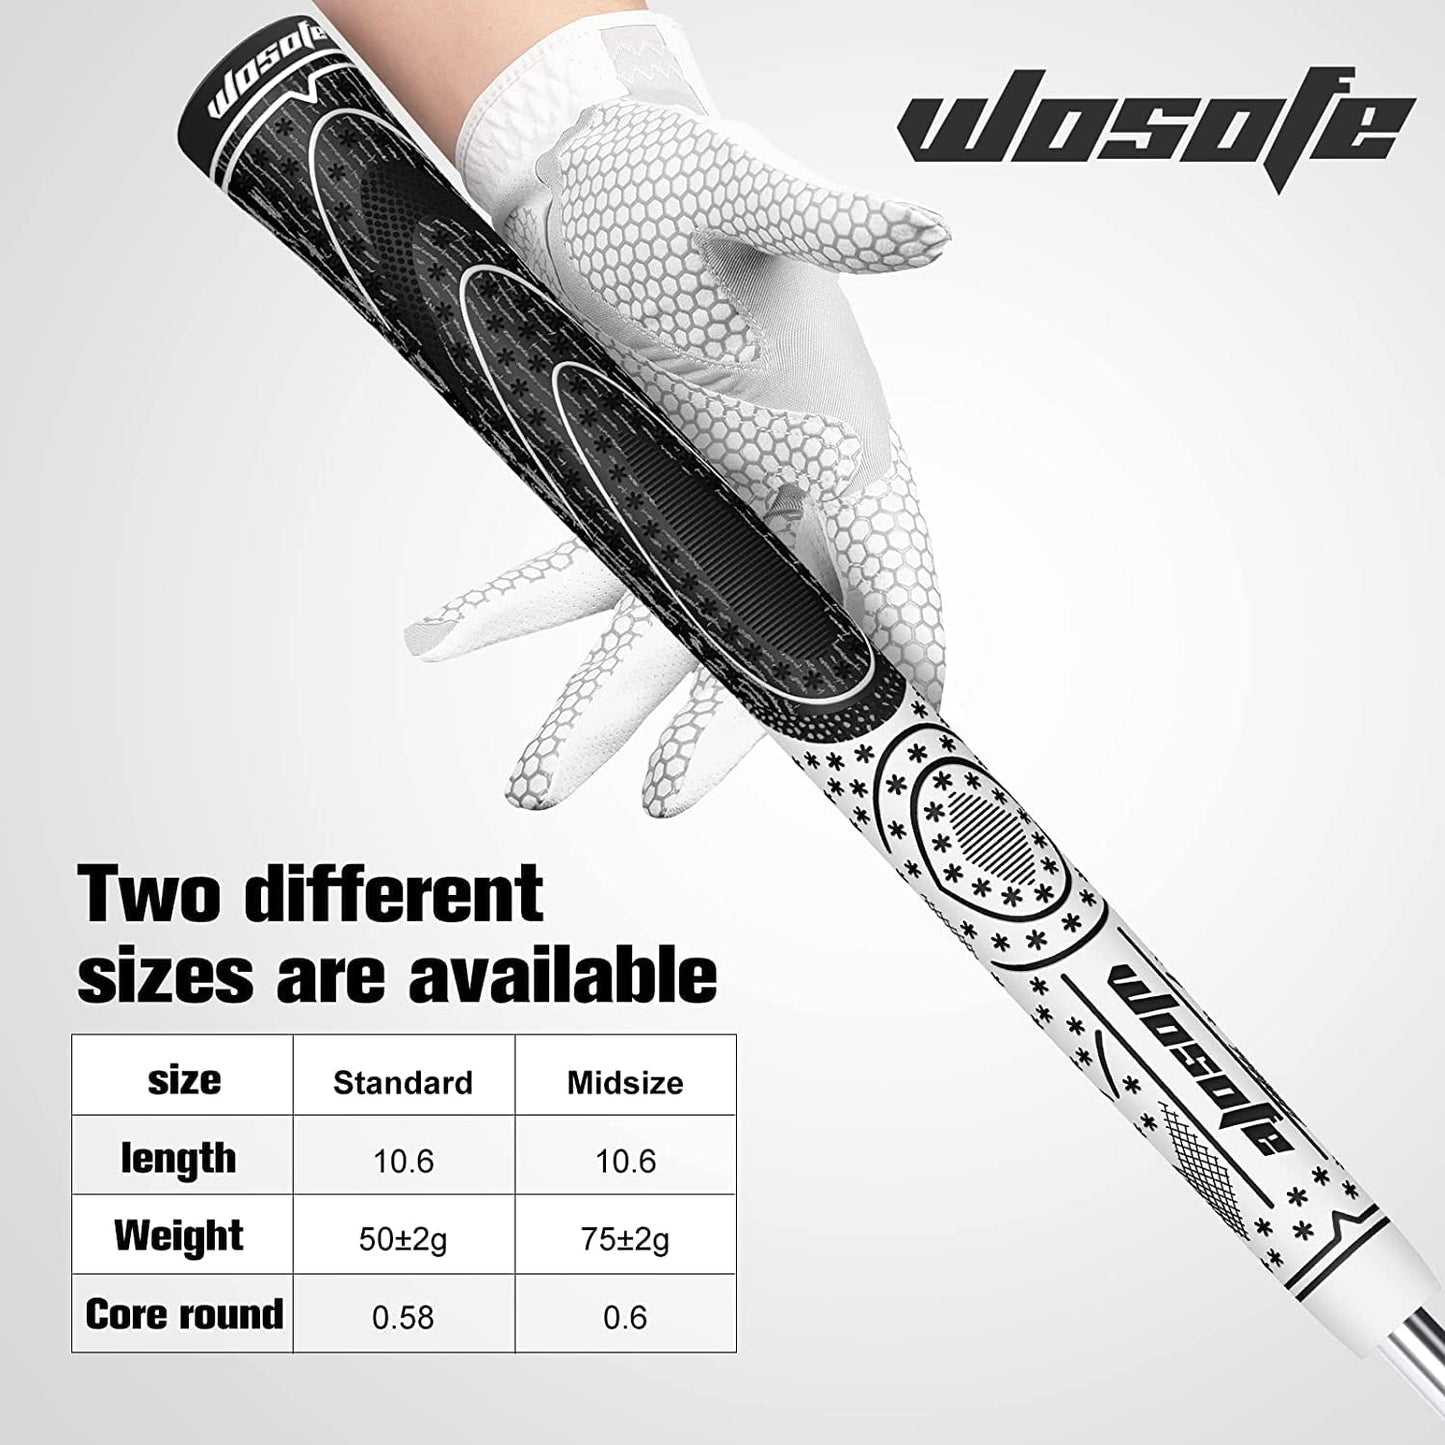 wosofe Golf Grips 13 Pack Cord Rubber Compound Material Hybrid Golf Club Grips Standard Midsize Options of 4 Colors All Weather Performance